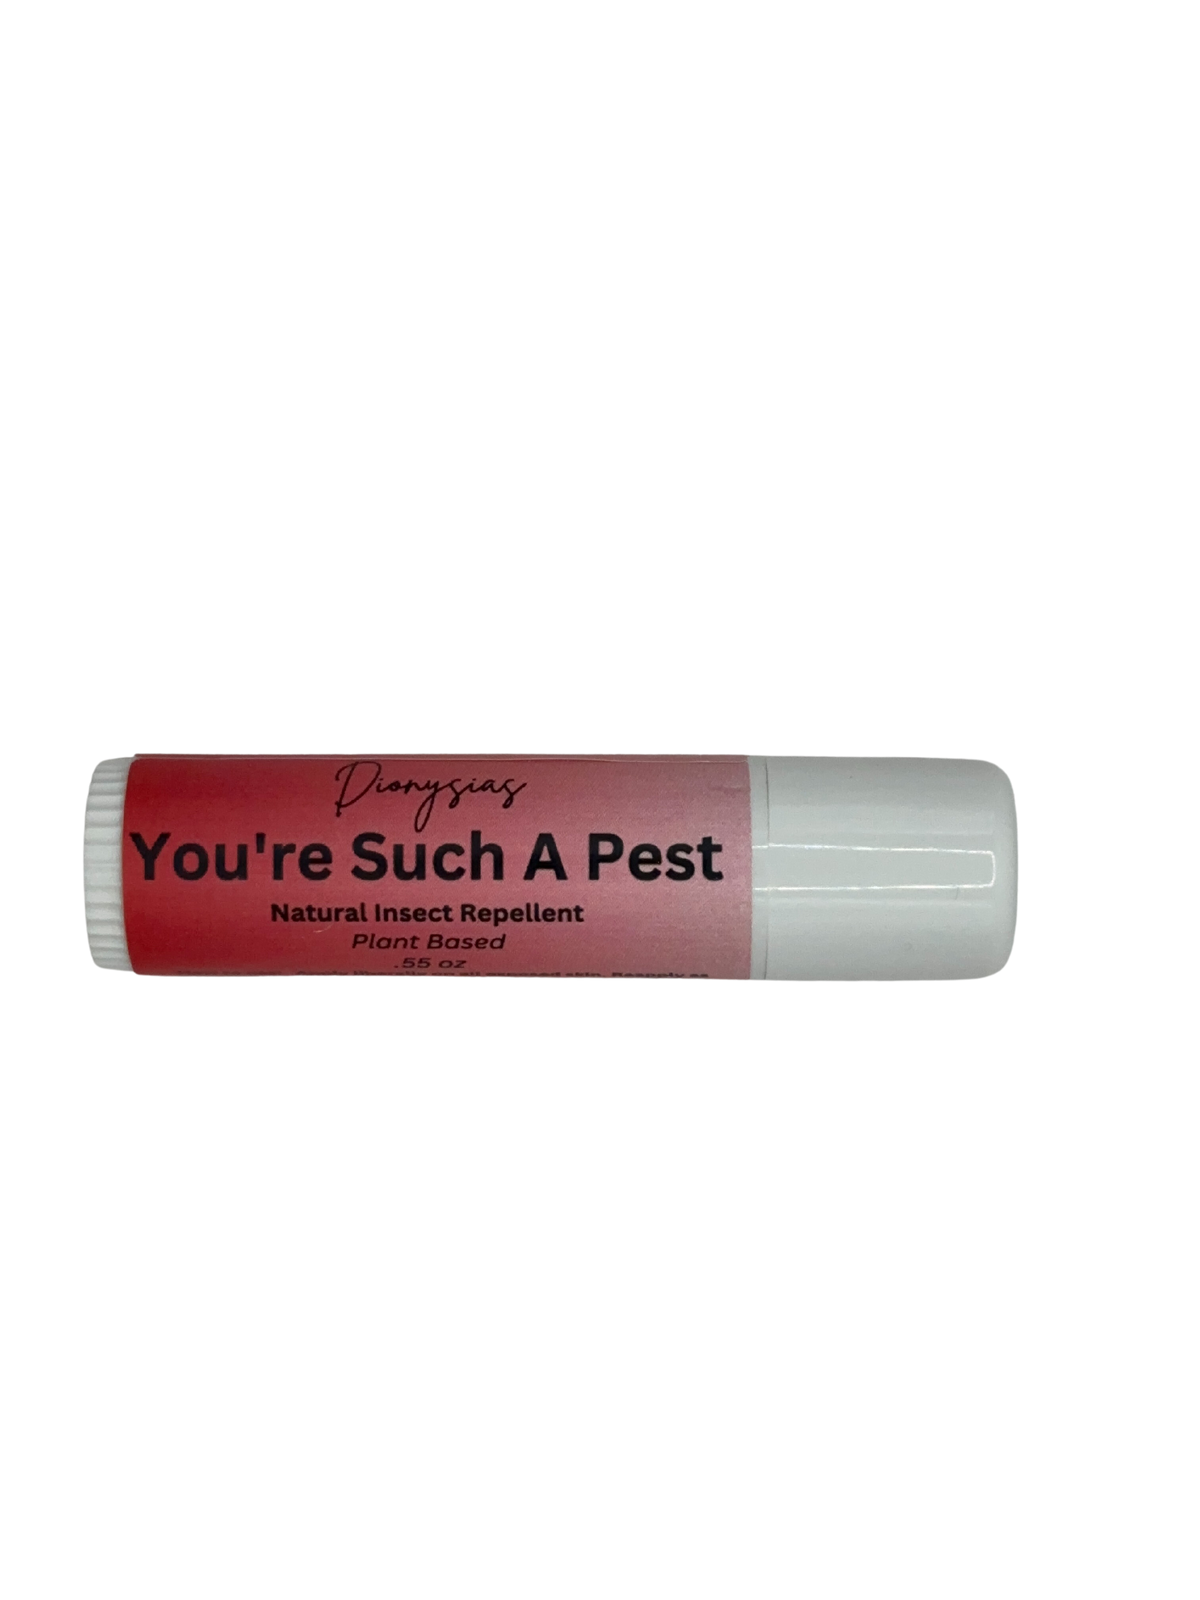 You're Such A Pest (plant based insect repellent)